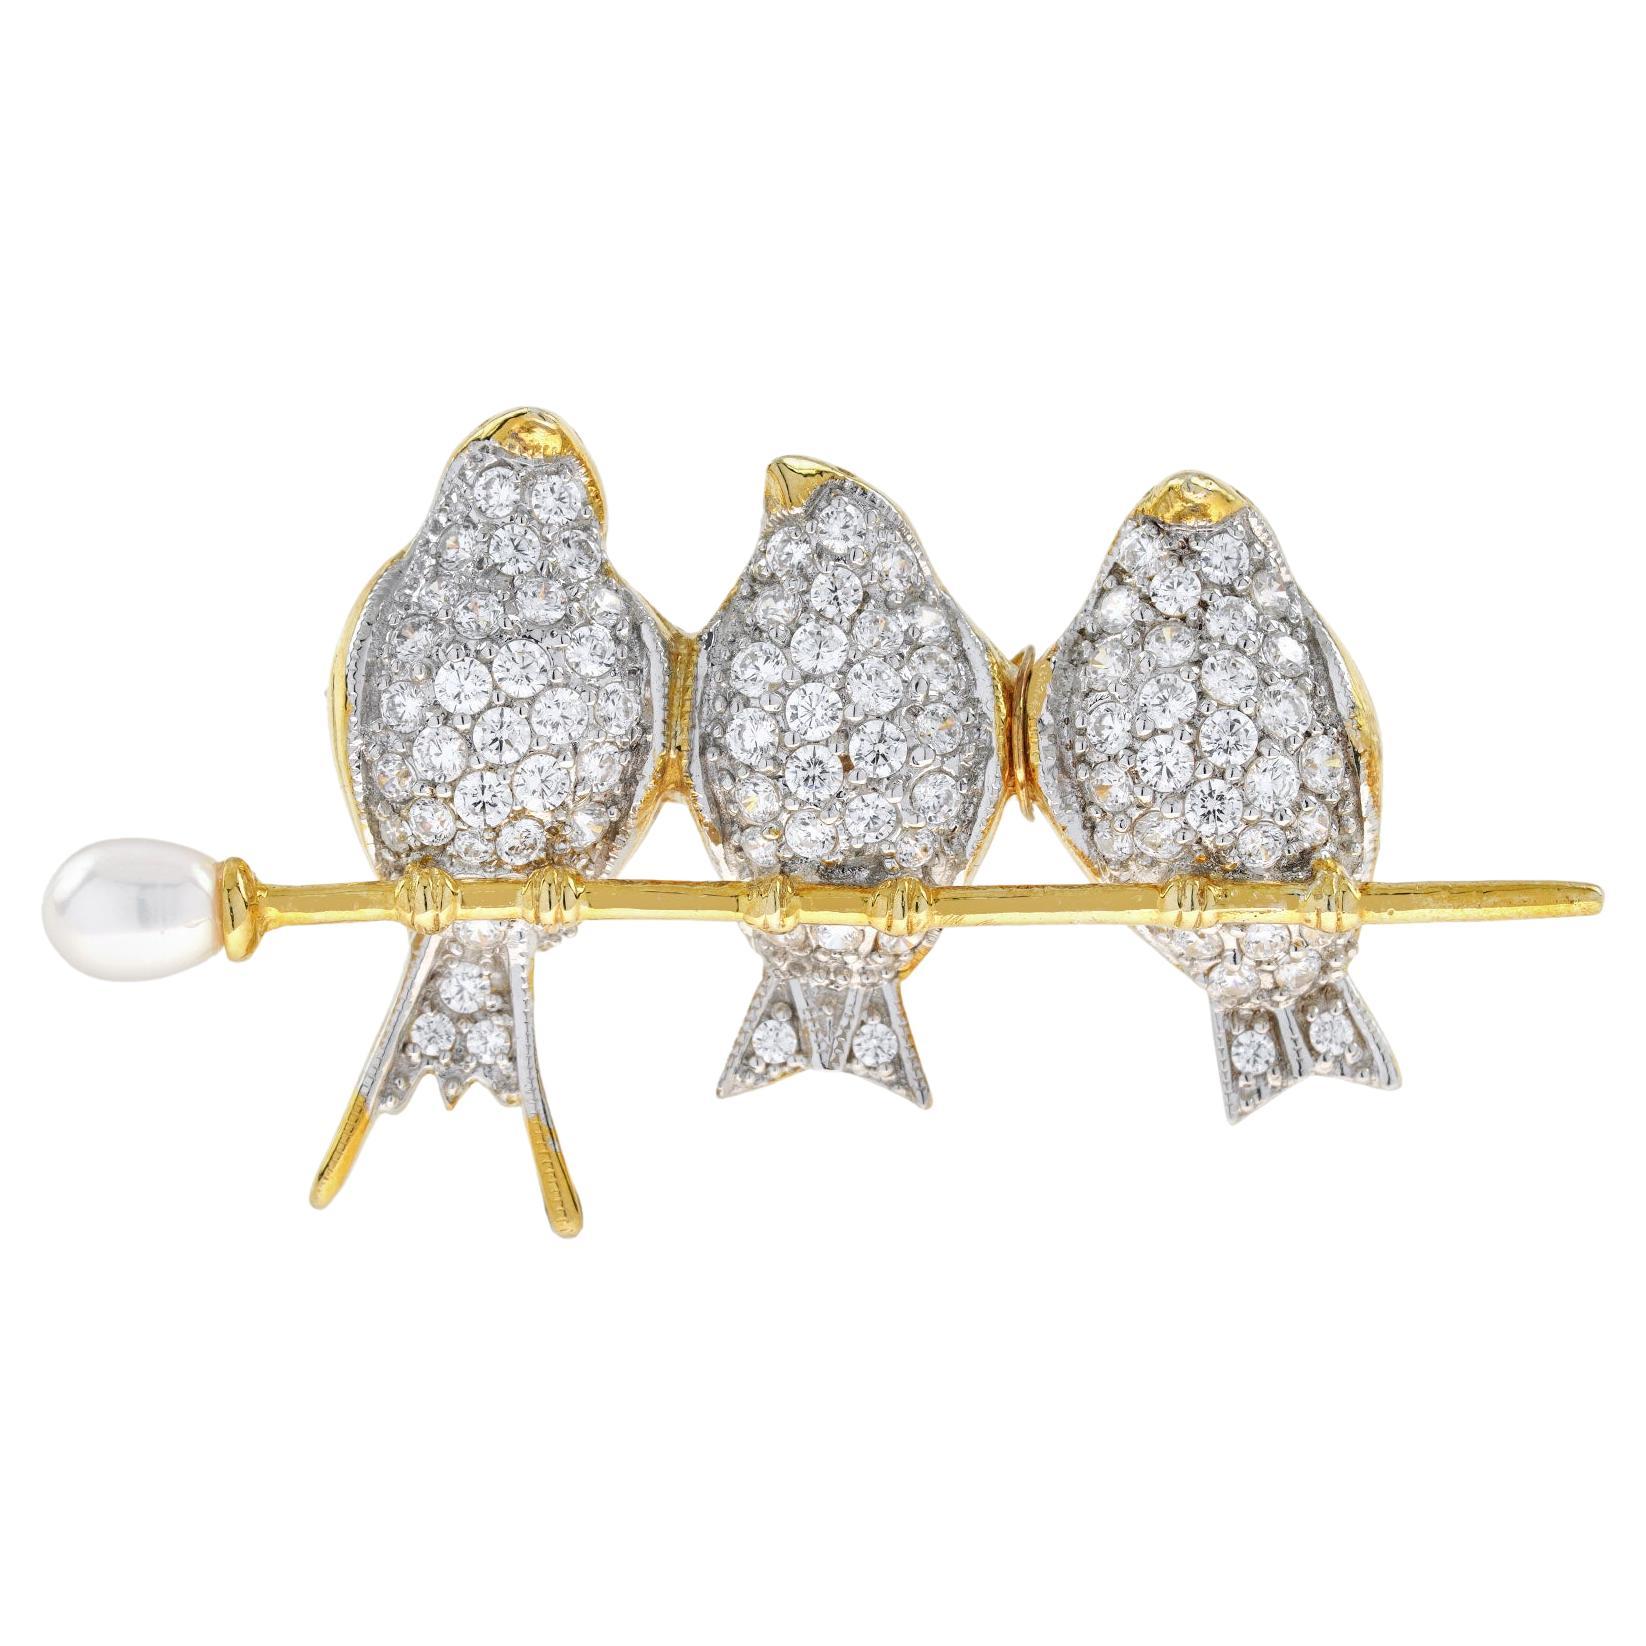 Diamond Birds on a Pearl Branch Vintage Style Brooch in 18K Two Tone Gold